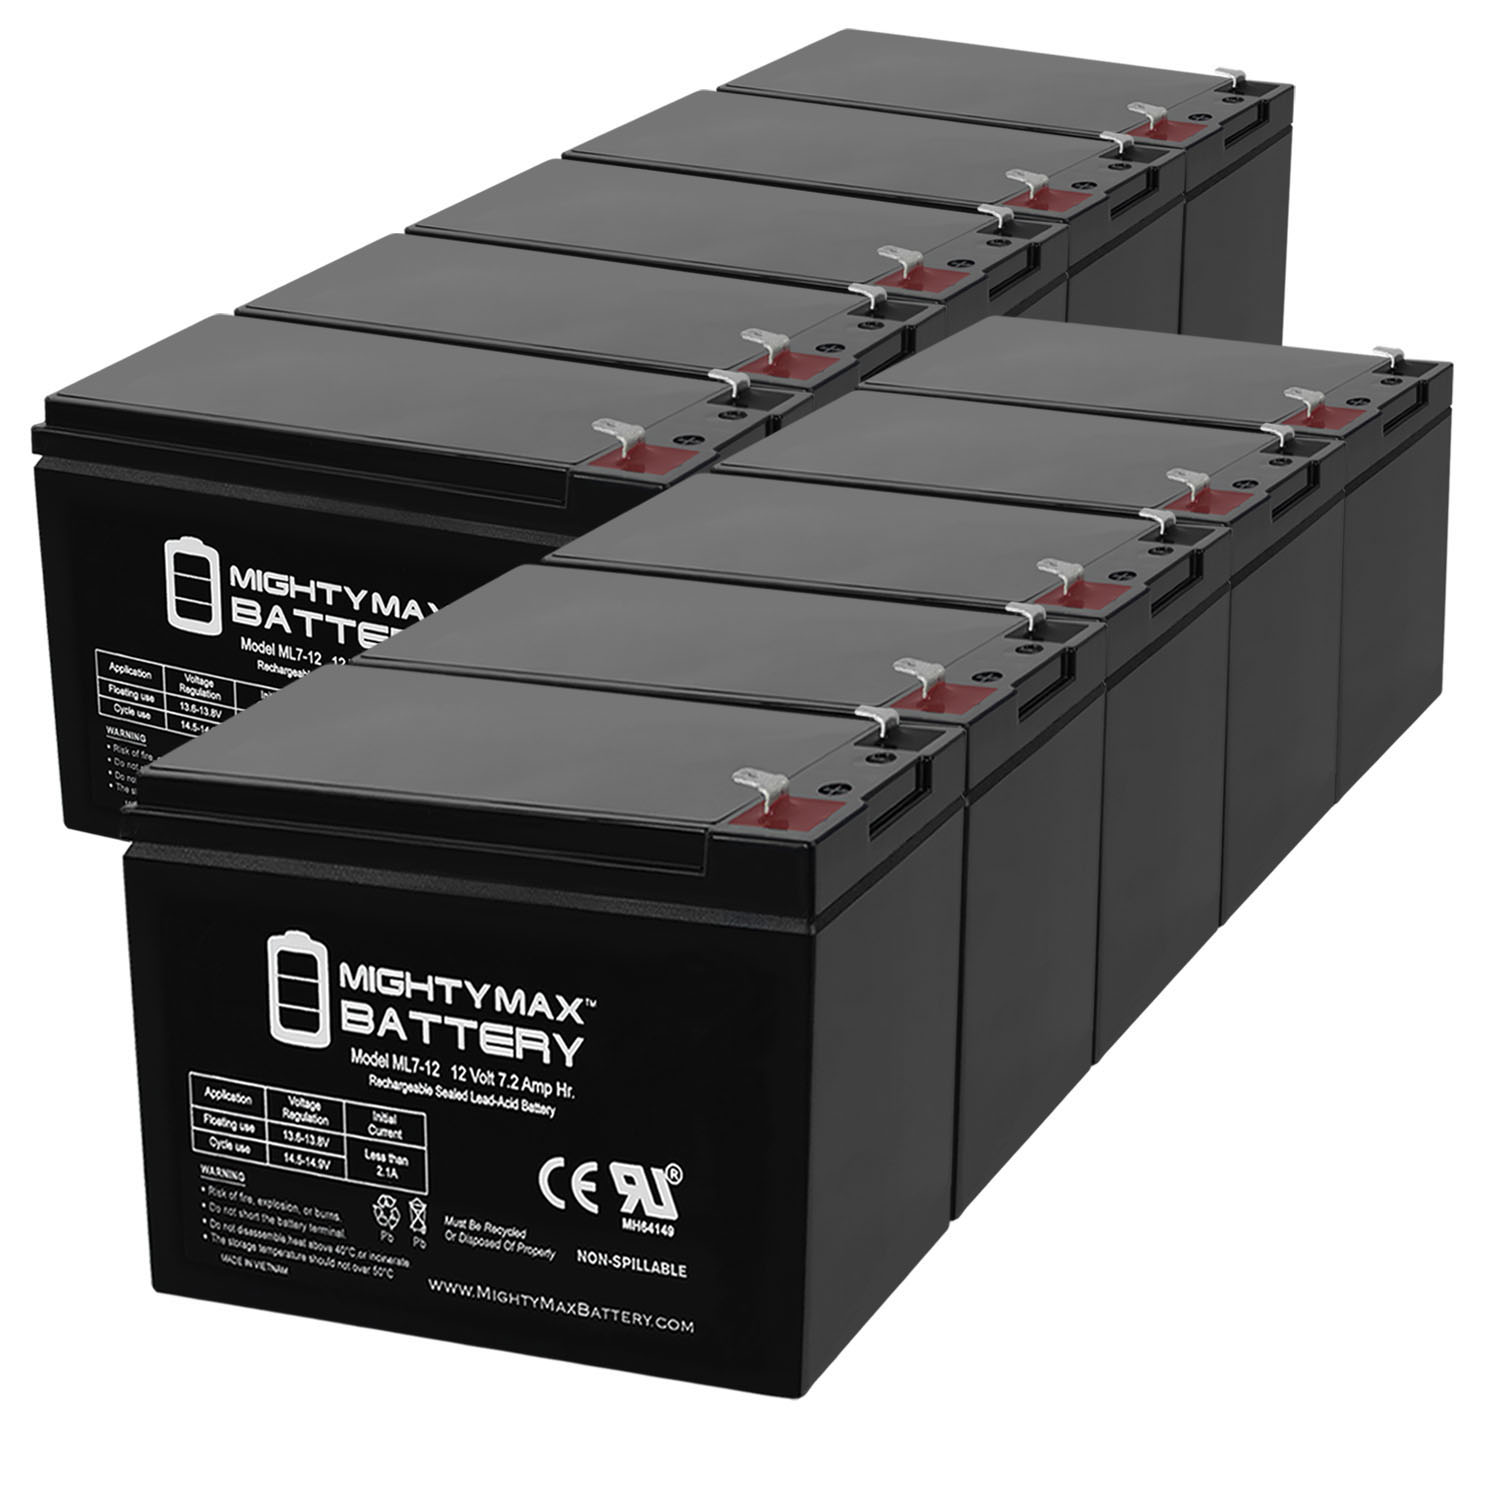 Mighty Max Battery ML7-12MP103612515 12v 7ah UPS Battery replaces 7ah Enduring CB-7-12 10 Pack